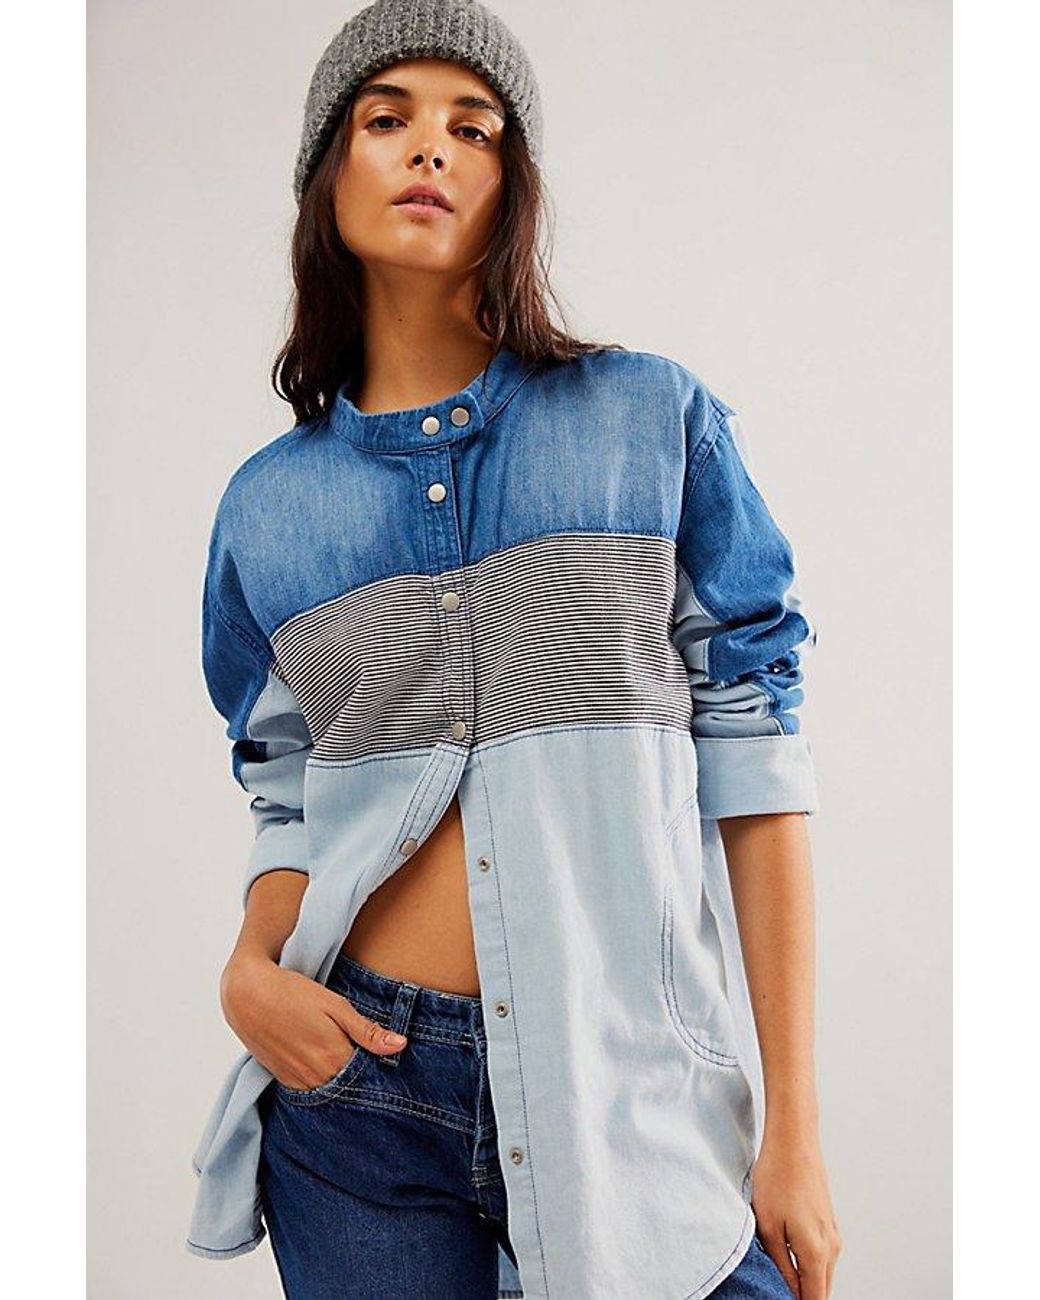 Free People Moto Colorblock Shirt At Free People In Blue Combo, Size: Xs